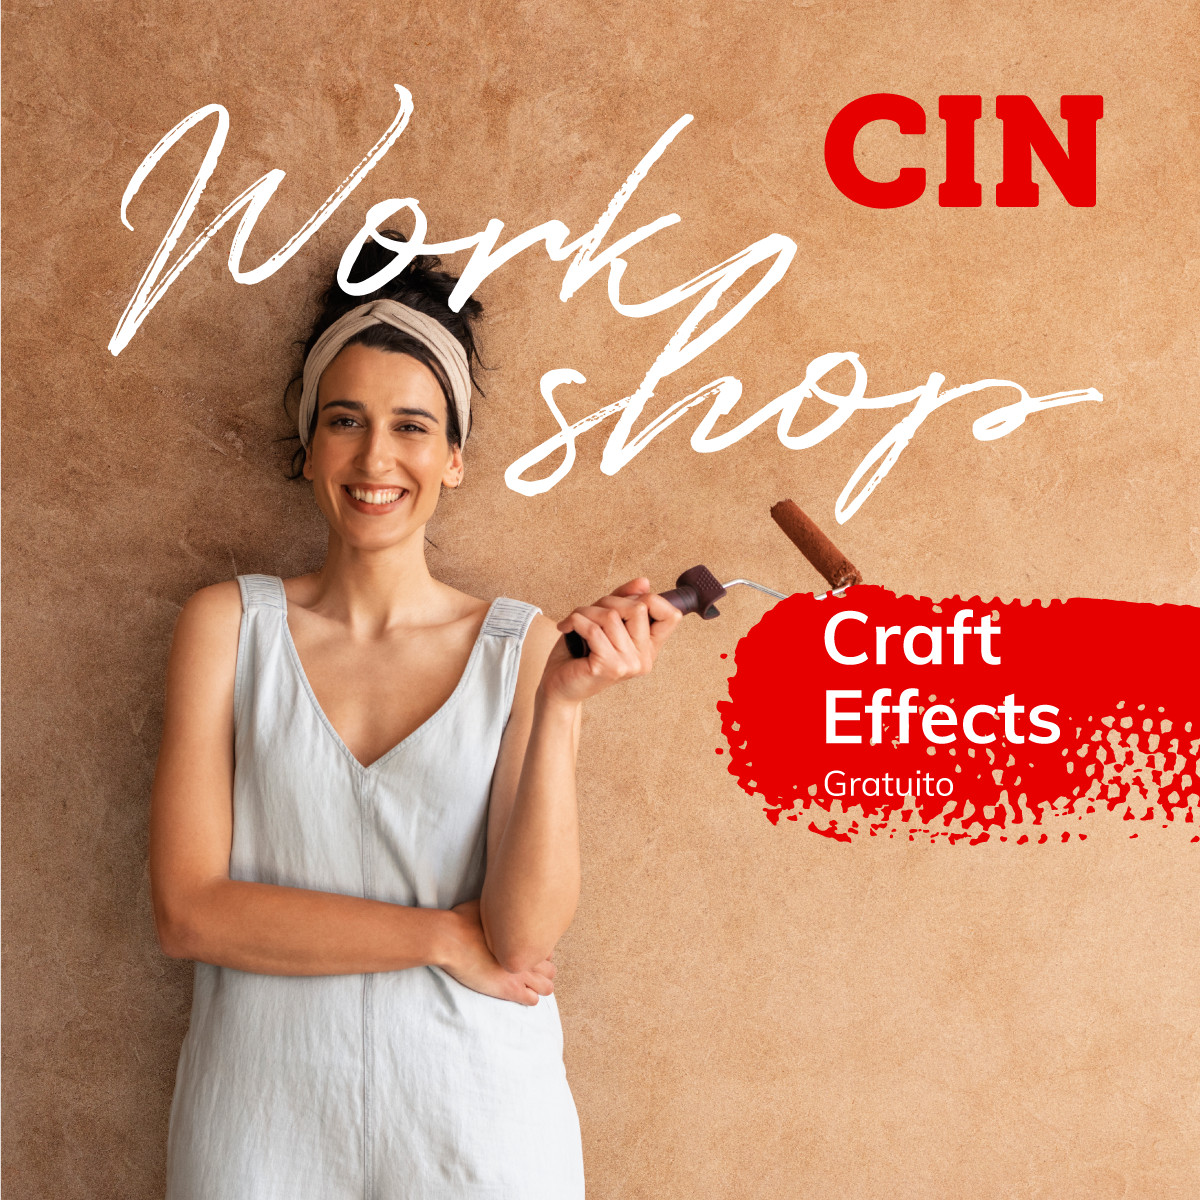 Free CIN workshops return to teach simple painting and decorating techniques